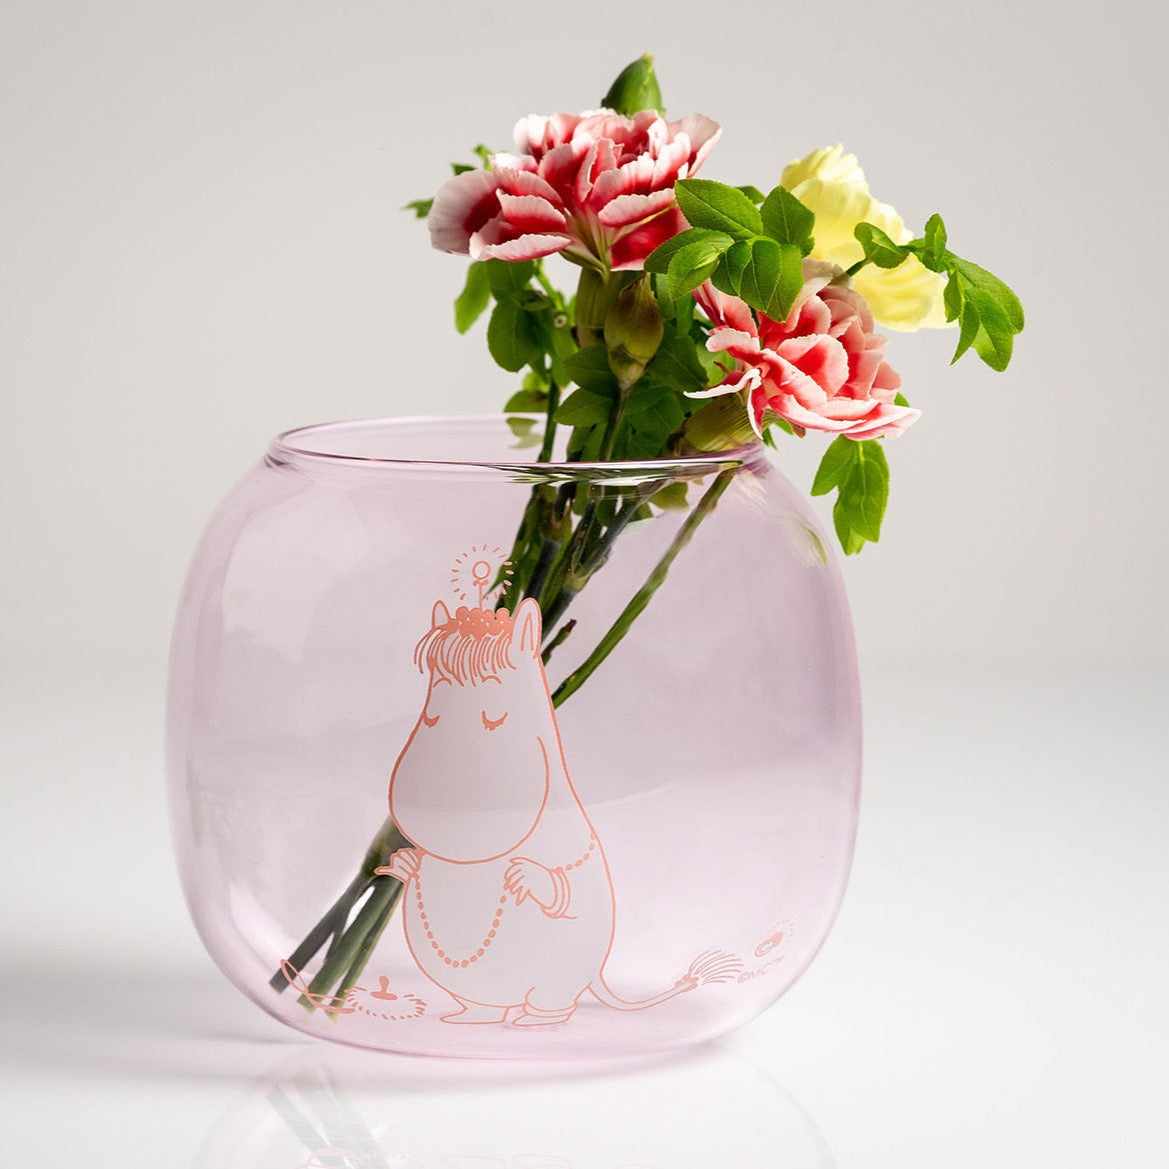 MOOMIN - Tealight Candle Holder, Snorkmaiden, Pink. By Muurla Design. 741-095-05